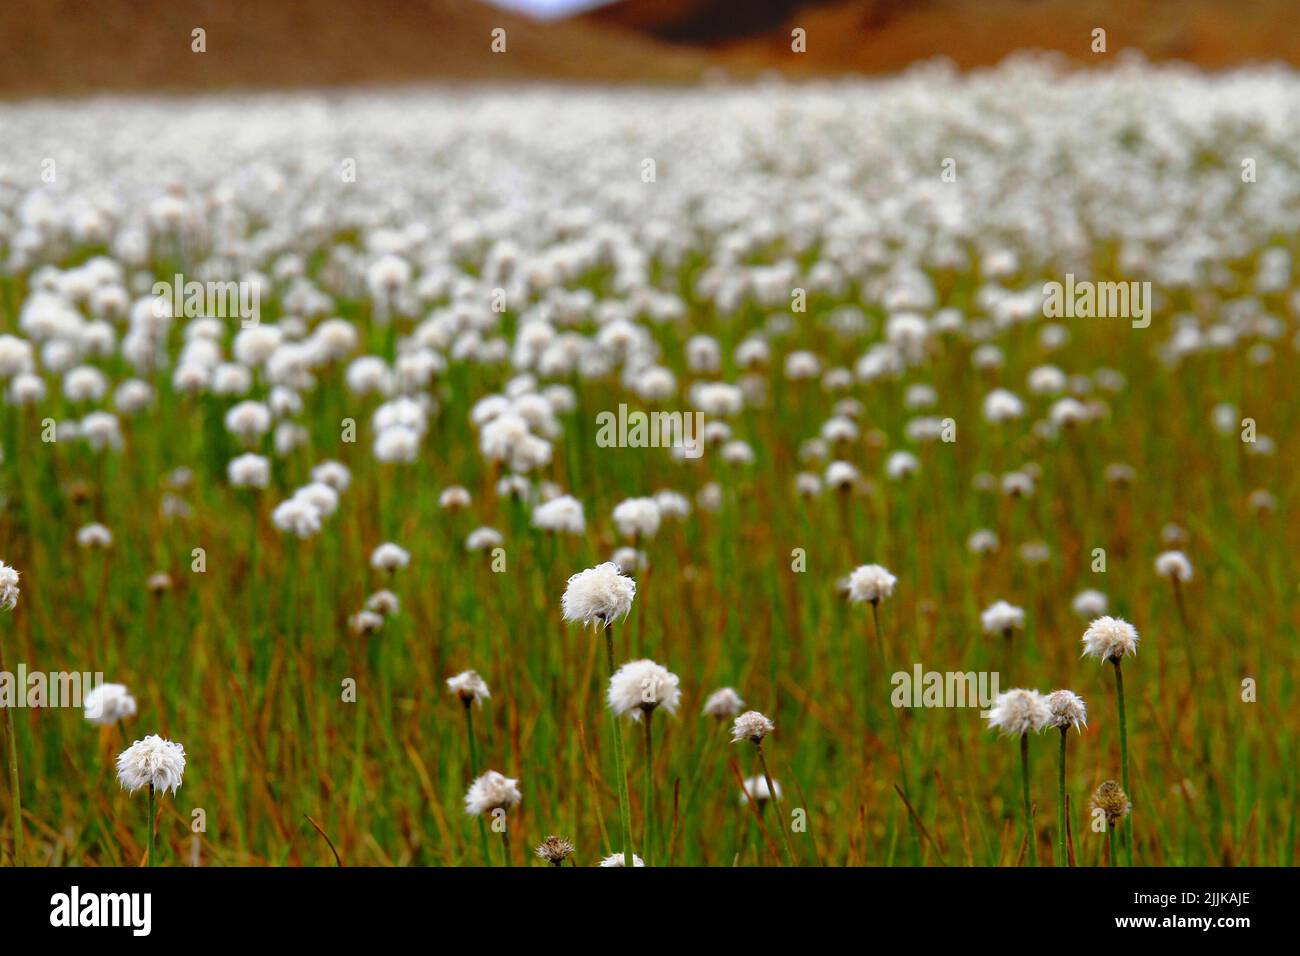 A beautiful view of a field of Eriophorum vaginatum blossom flowers with grass land Stock Photo